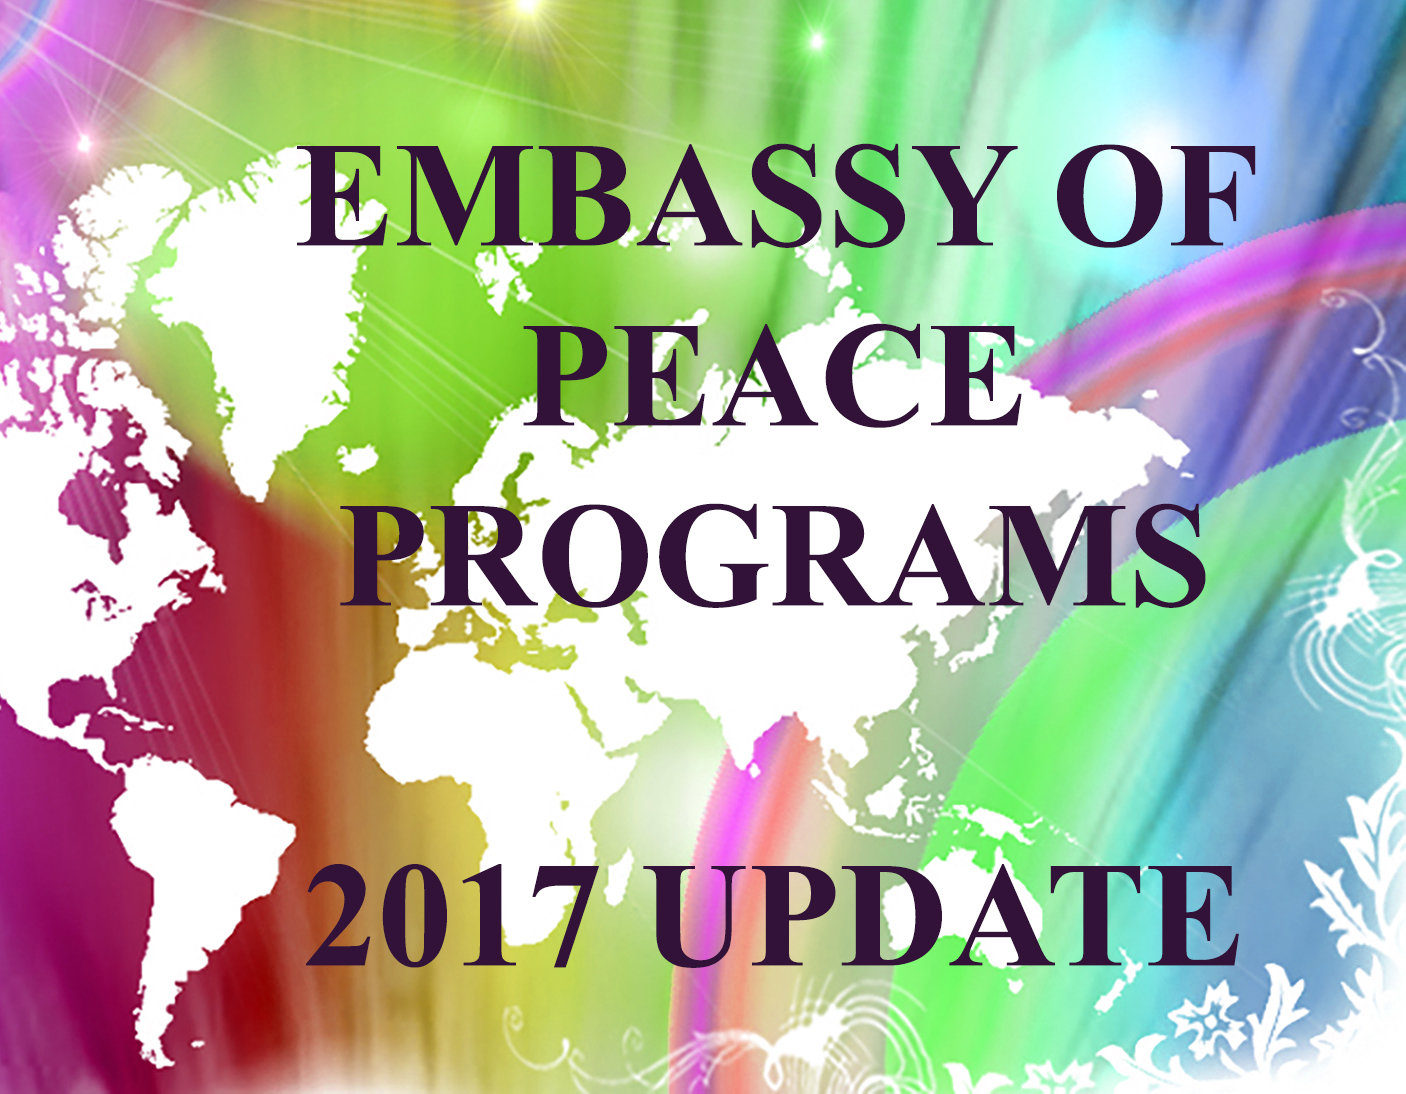 Our Embassy Programs in 2017